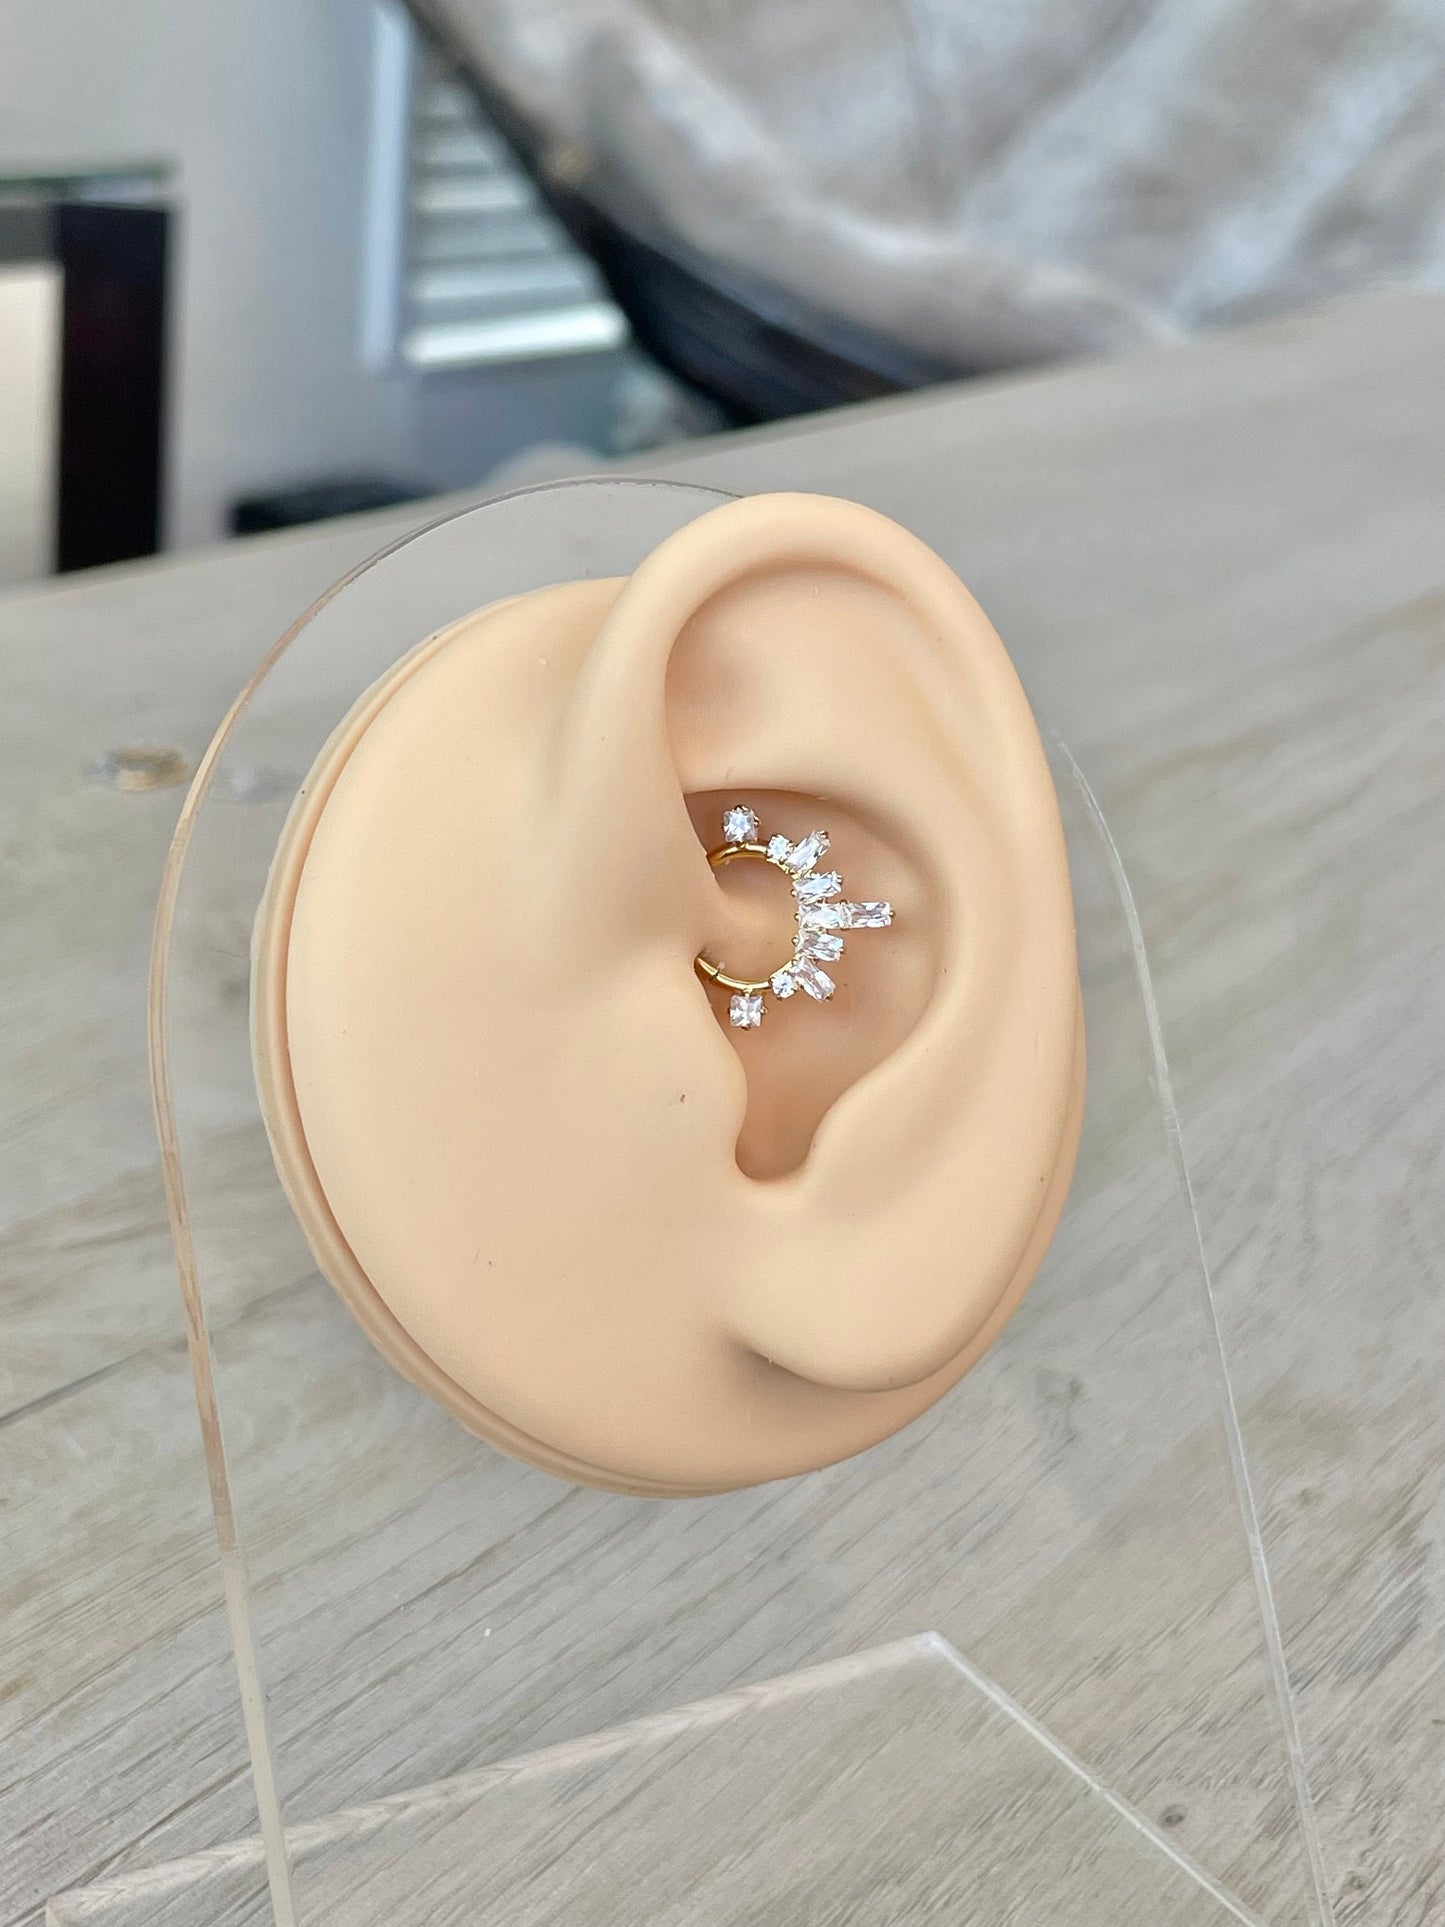 14k Yellow Gold Daith Earring (16G, 8mm or 10mm)